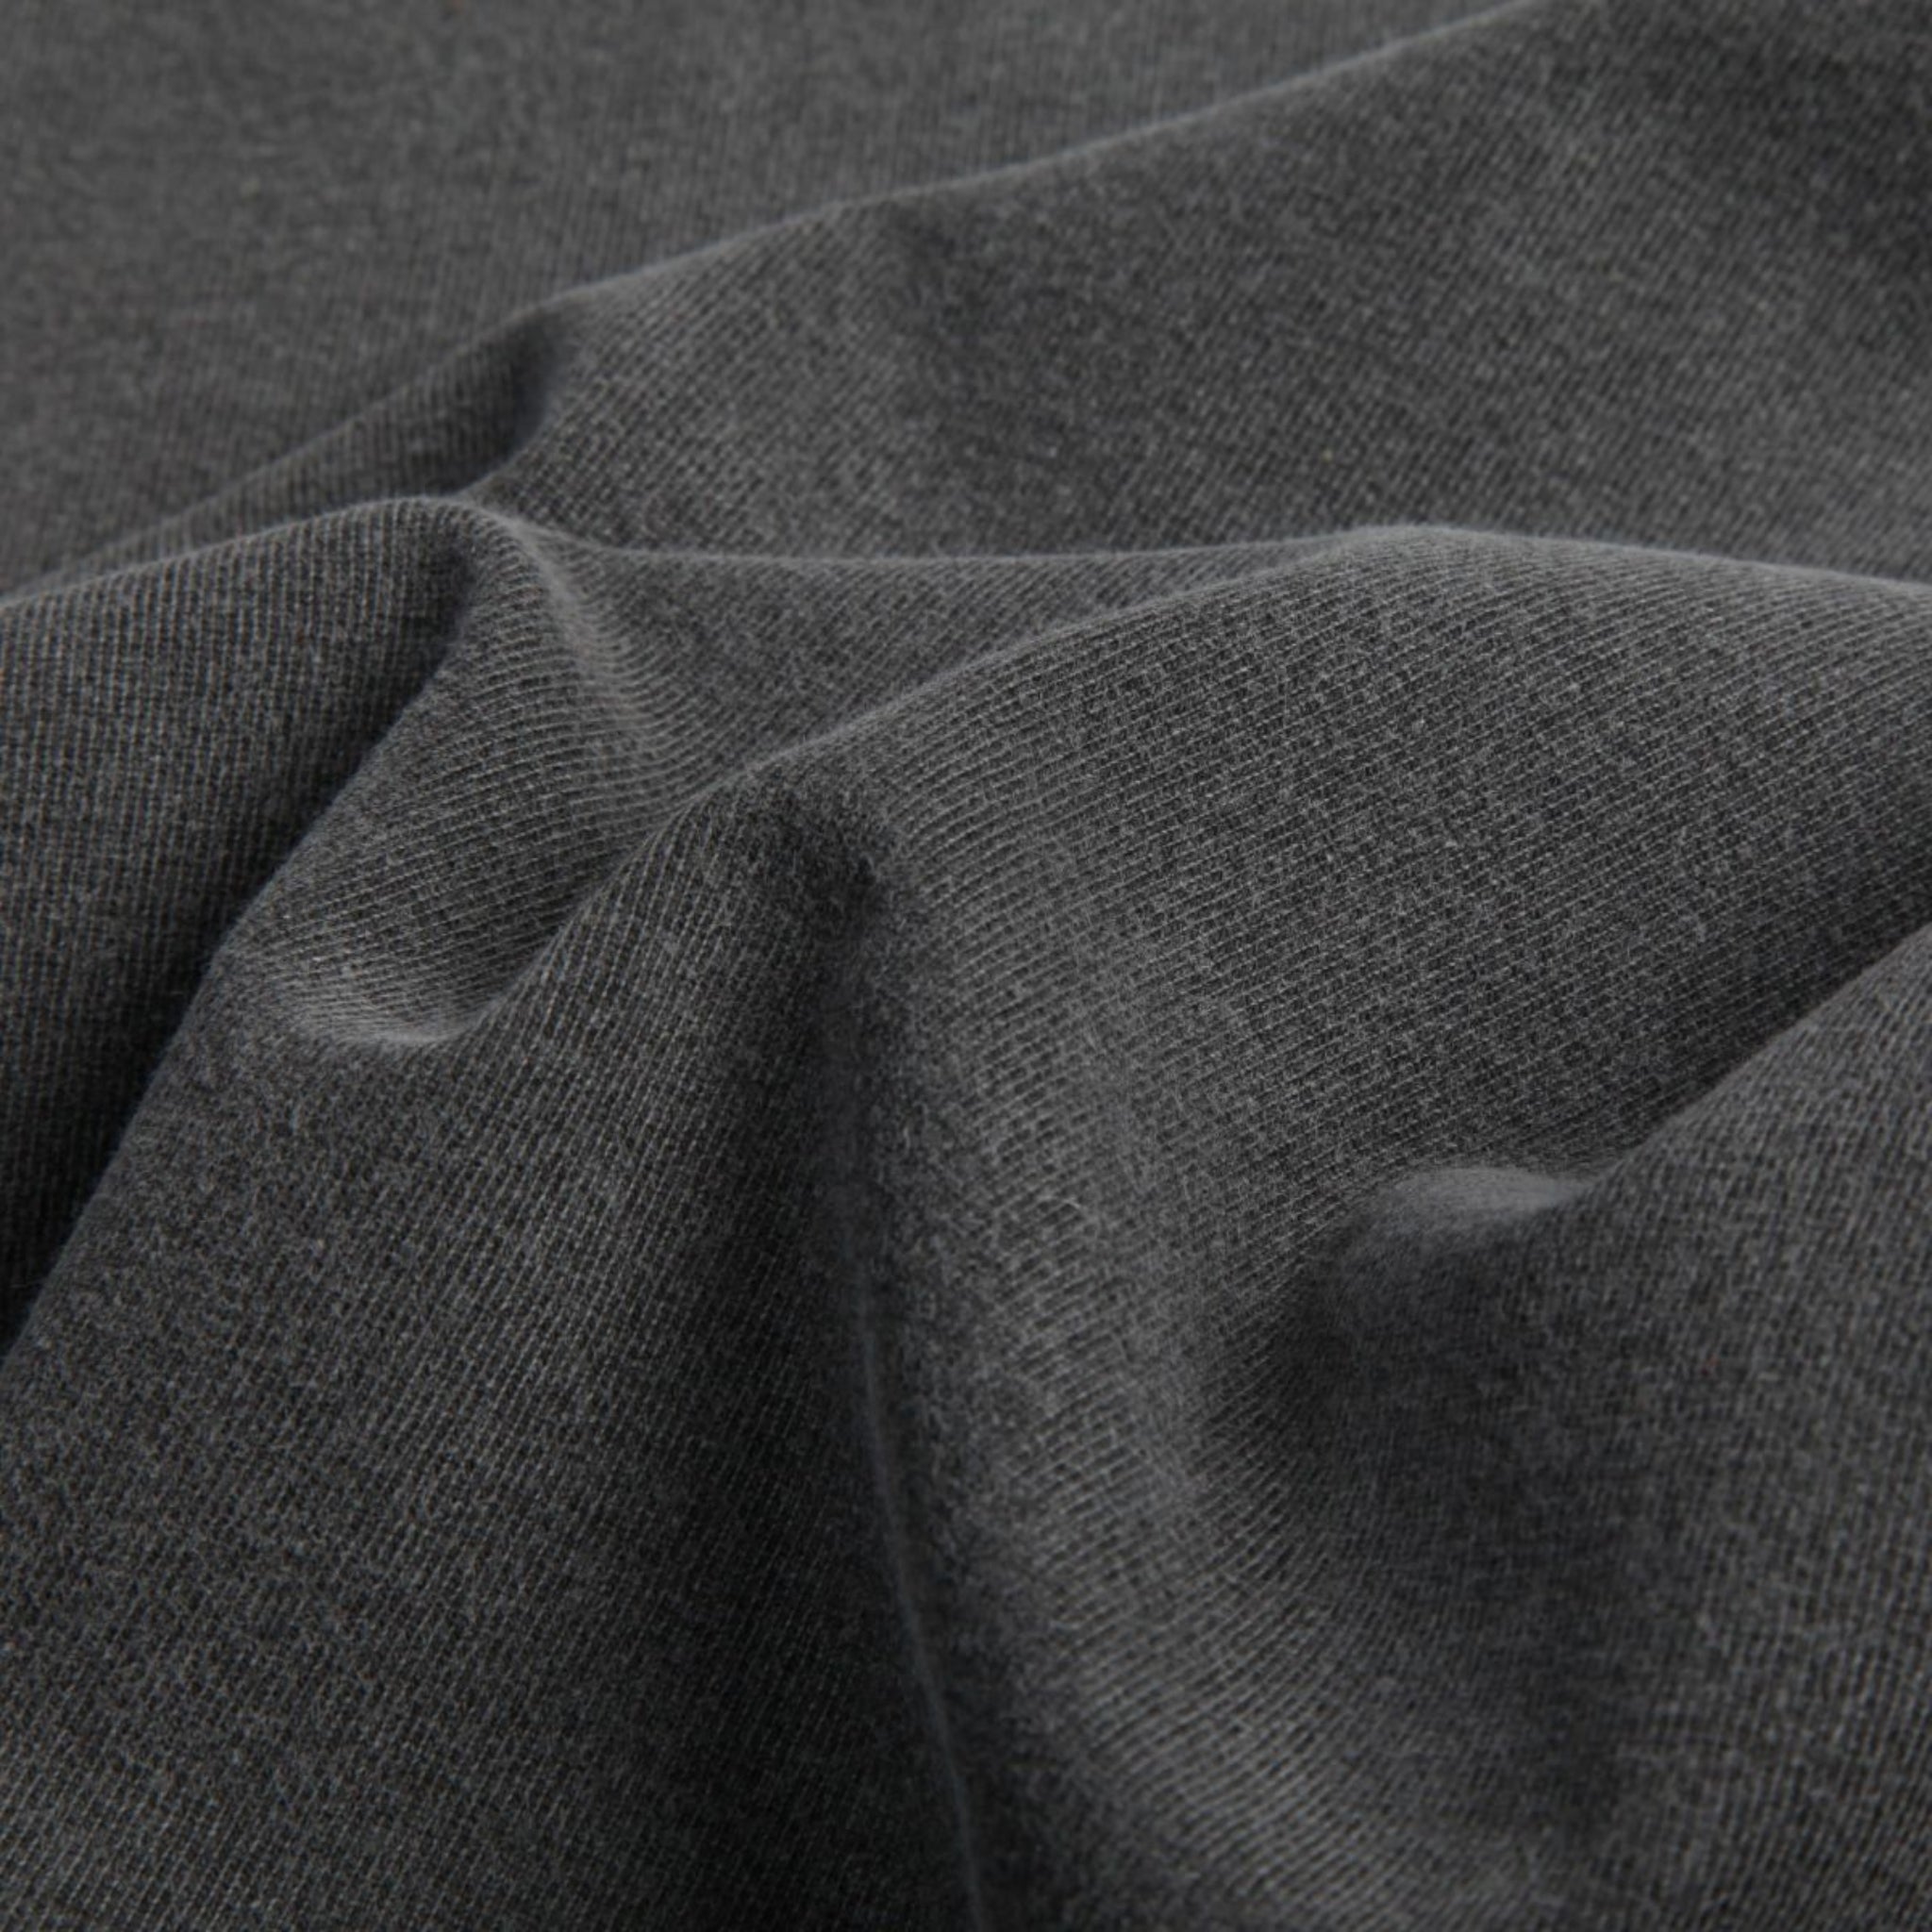 close up detail of the charcoal knit of Bedi t-shirts